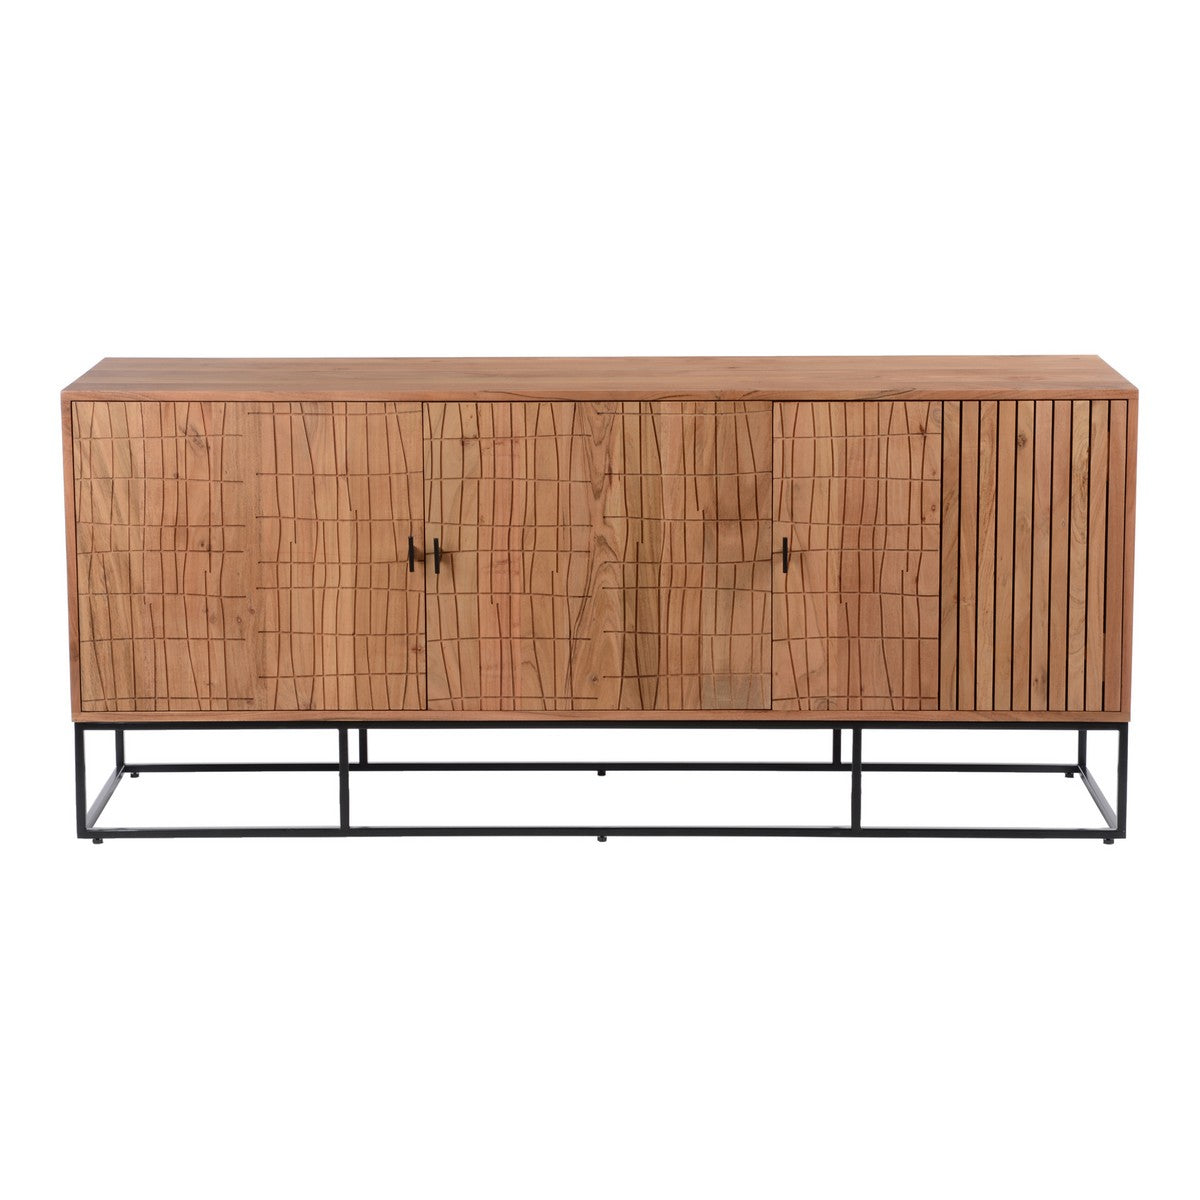 Moe's Home Collection Atelier Sideboard Natural - BZ-1110-24 - Moe's Home Collection - Sideboards - Minimal And Modern - 1